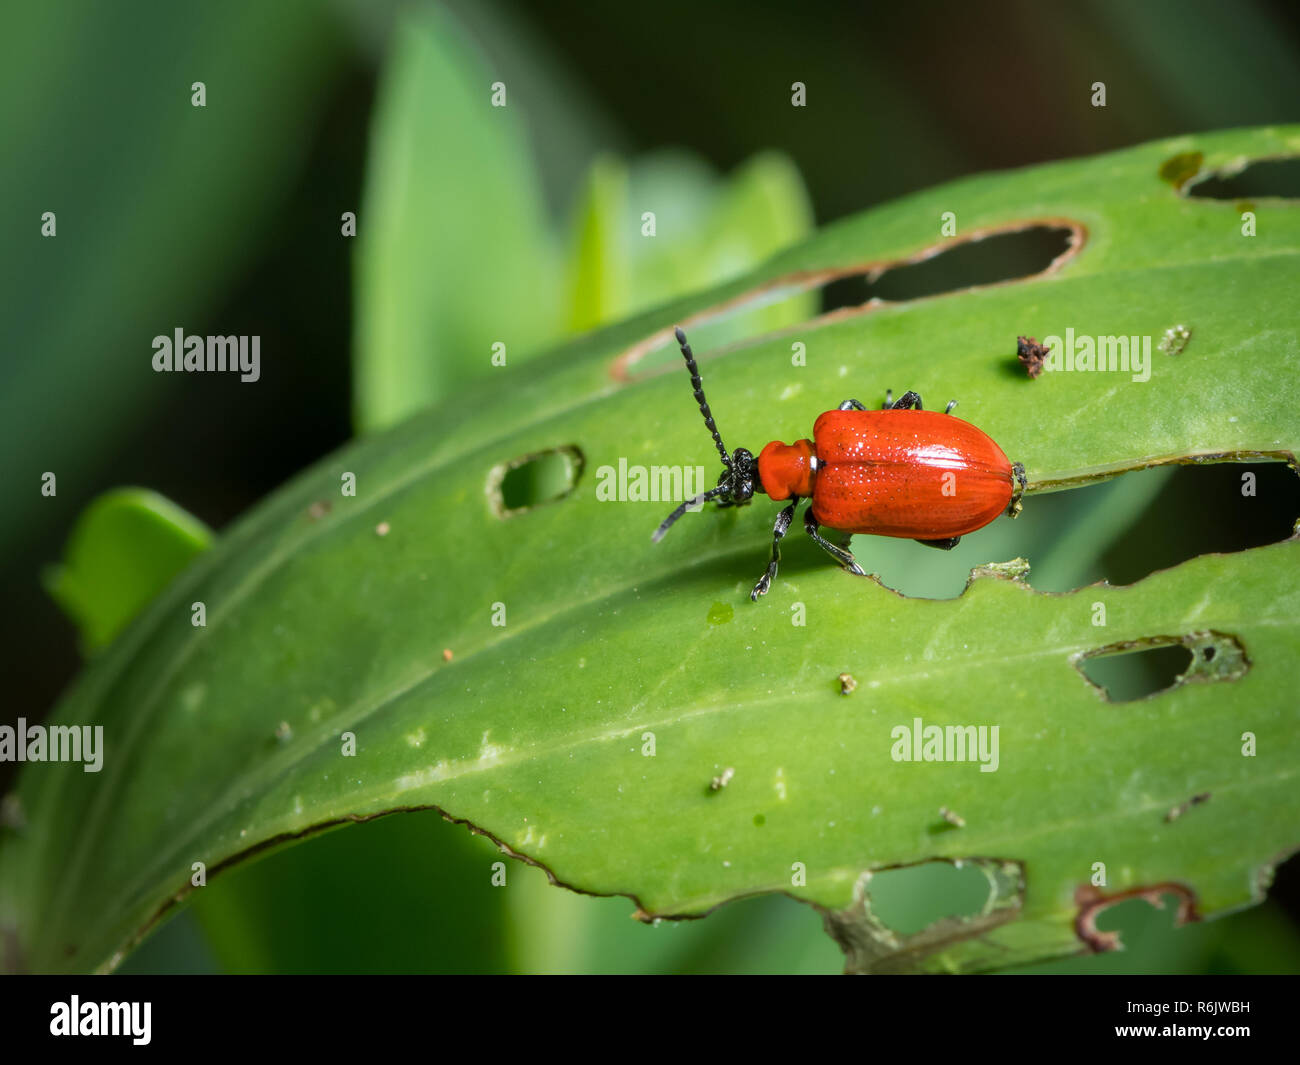 Scarlet lily beetle (Lilioceris lilii, family Chrysomelidae) sitting on a green leaf Stock Photo